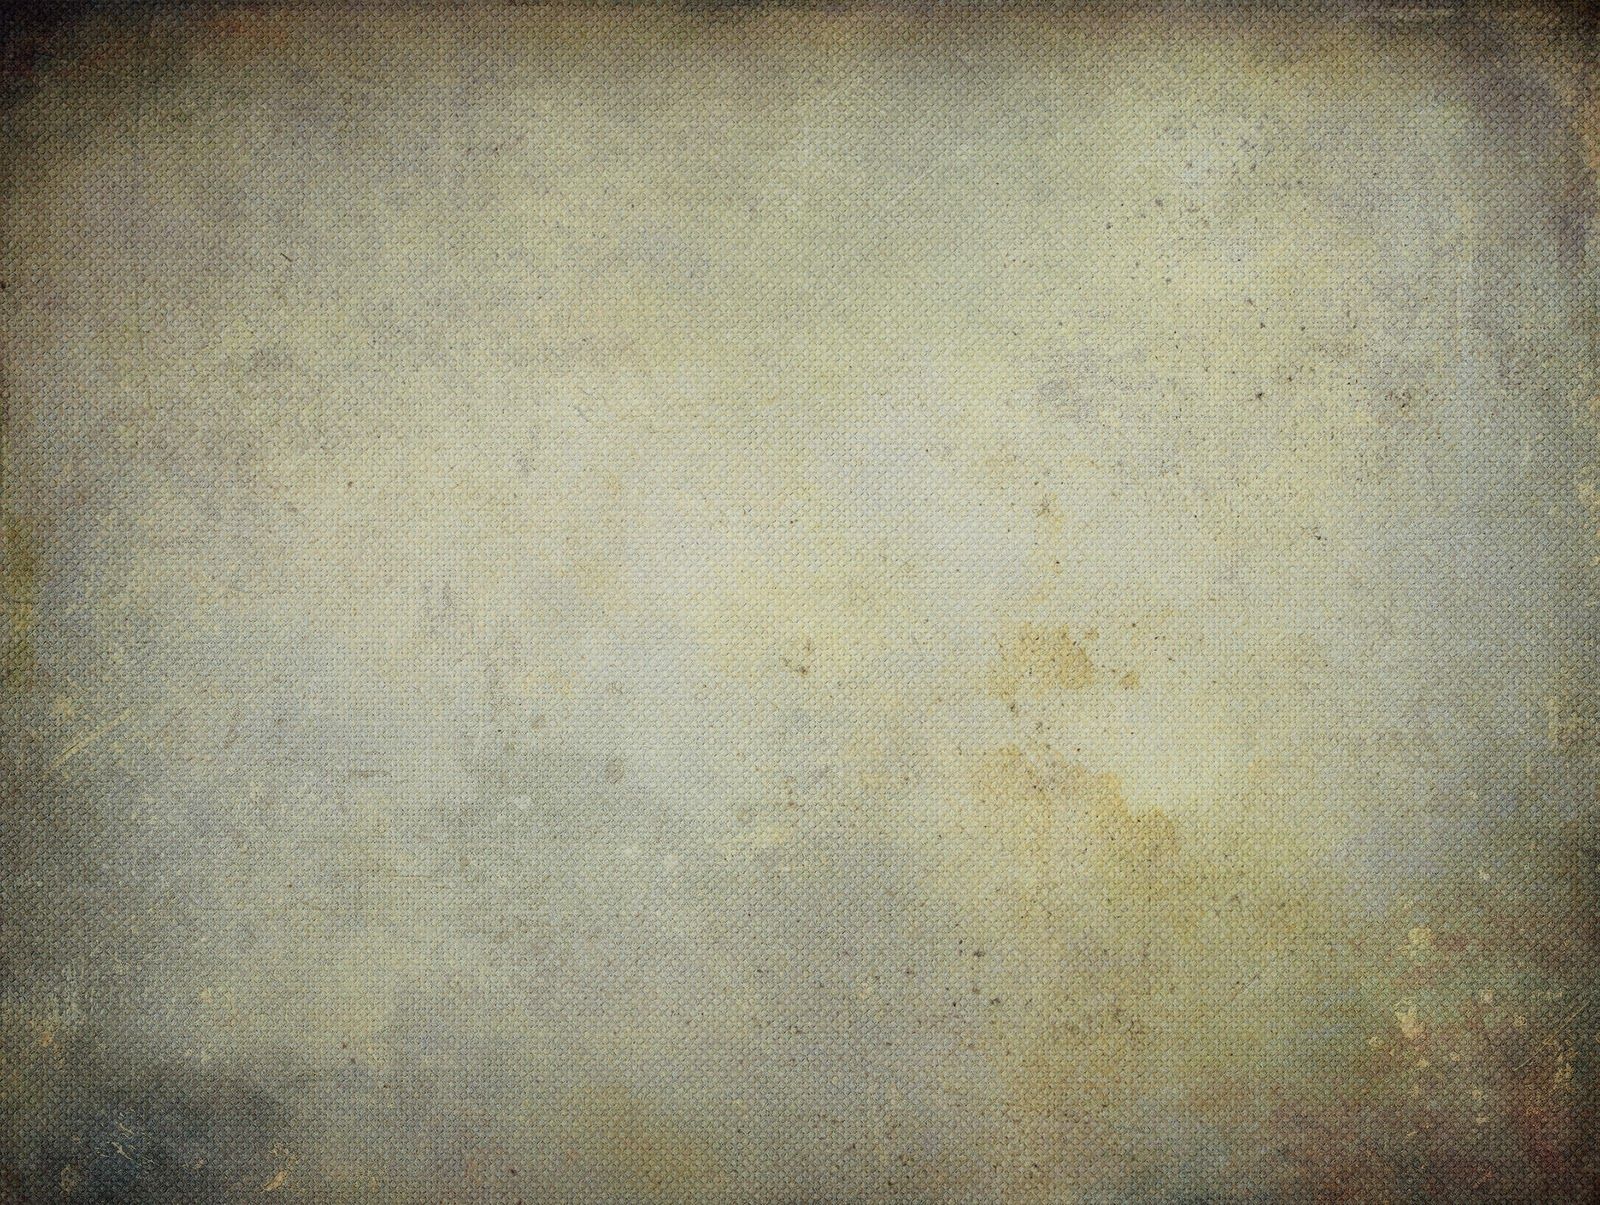 White Fabric Canvas Texture Background For Design Blackdrop Or Overlay Background Stock Image ...